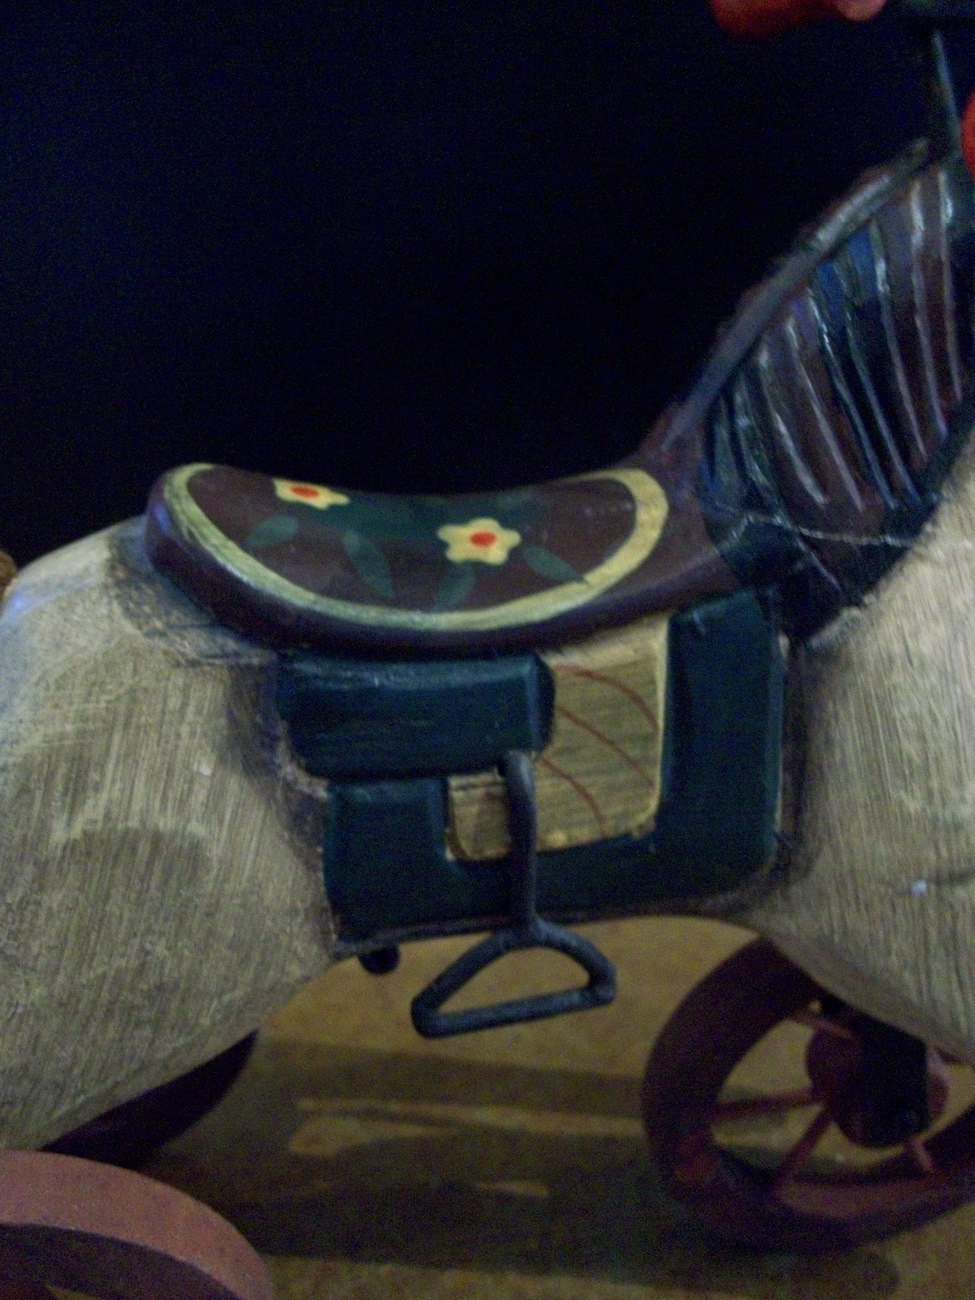 antique riding horse on wheels